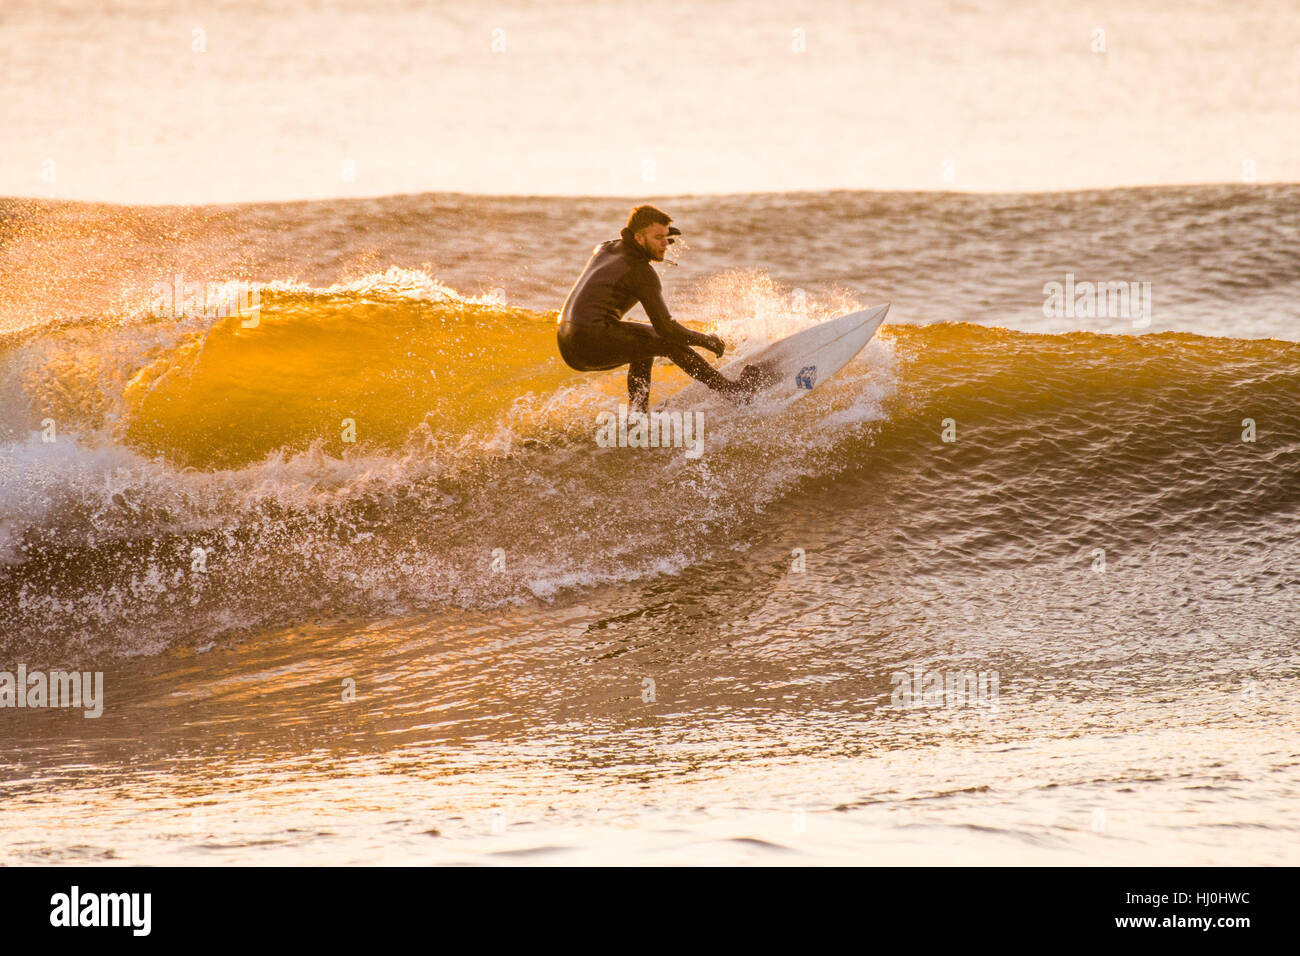 Aberystwyth Wales UK, Saturday 21 January 2017  UK weather: After a freezing cold night, with temperatures well below zero, surfers enjoy the waves at sunset at the end of a fine day of warm sunshine  in Aberystwyth on the Cardigan Bay coast of West Wales    photo  Keith Morris / Alamy Live News Stock Photo